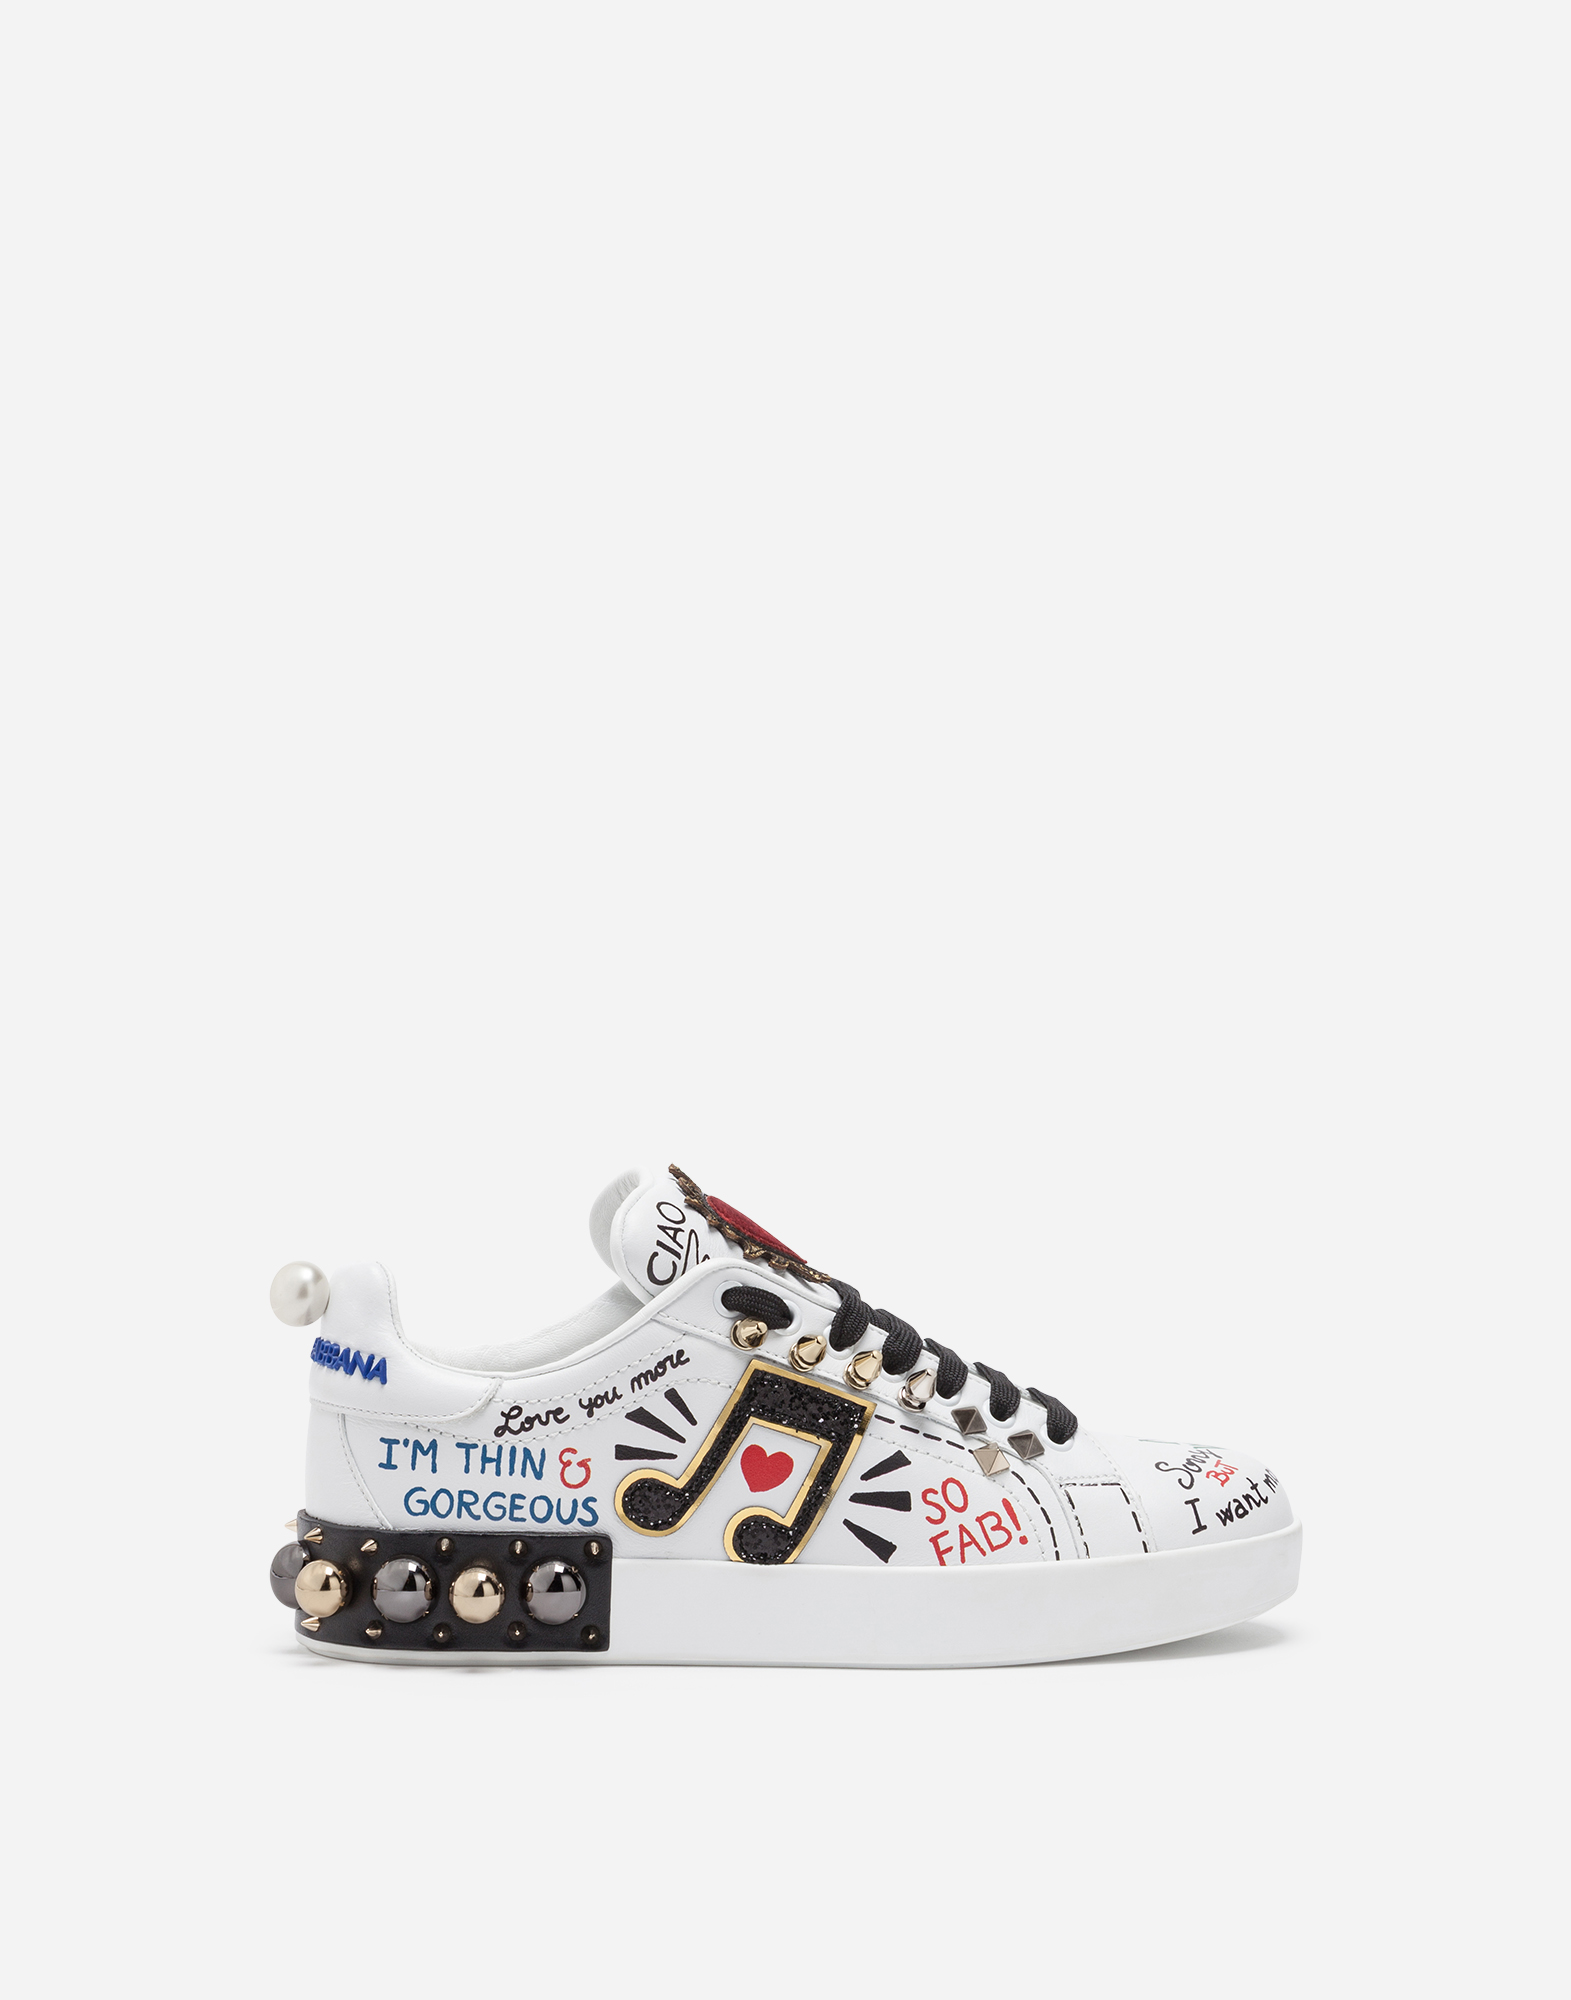 dolce gabbana personalized sneakers